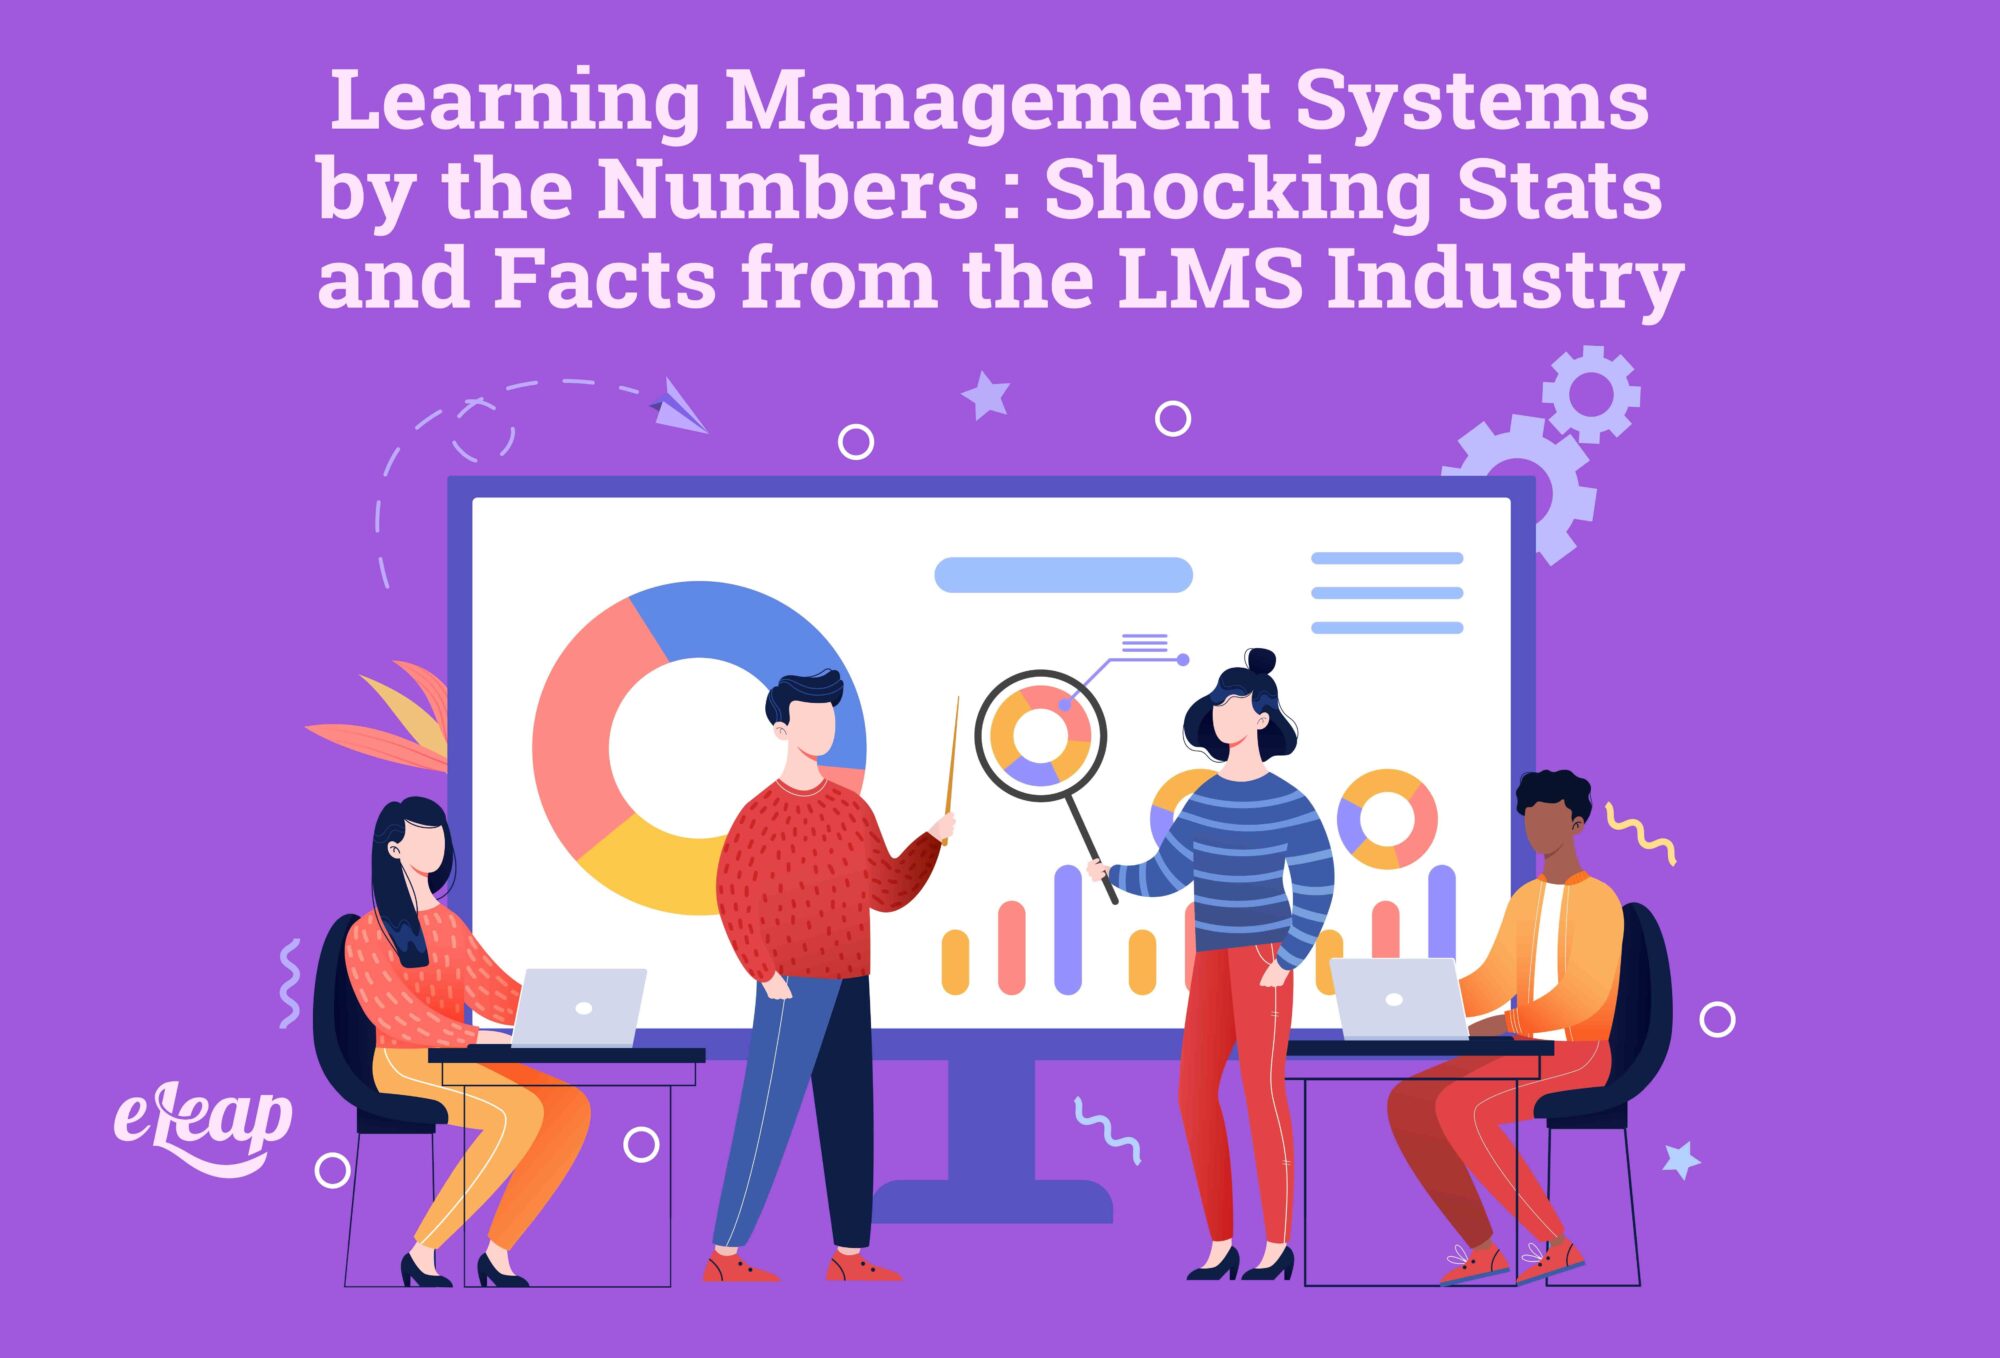 Learning Management Systems by the Numbers: Shocking Stats and Facts from the LMS Industry